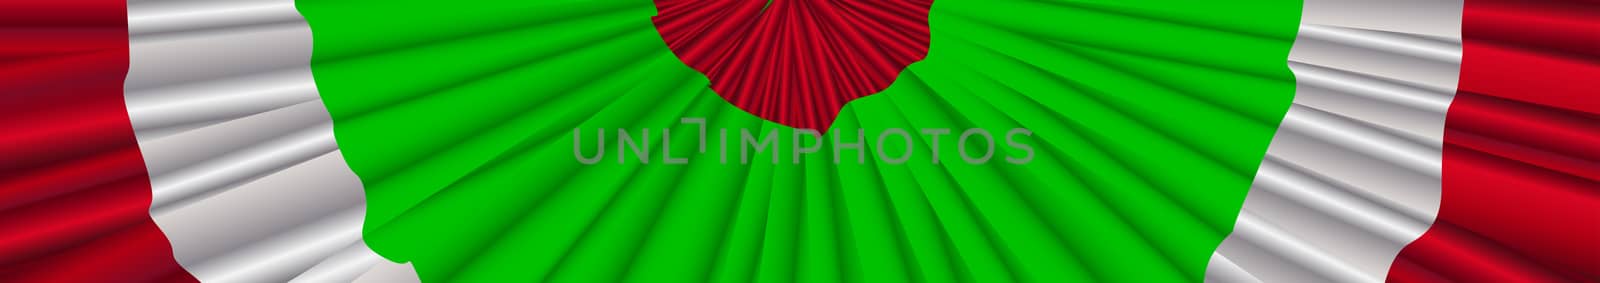 Red white and green Italian flag colour bunting banner over a white background